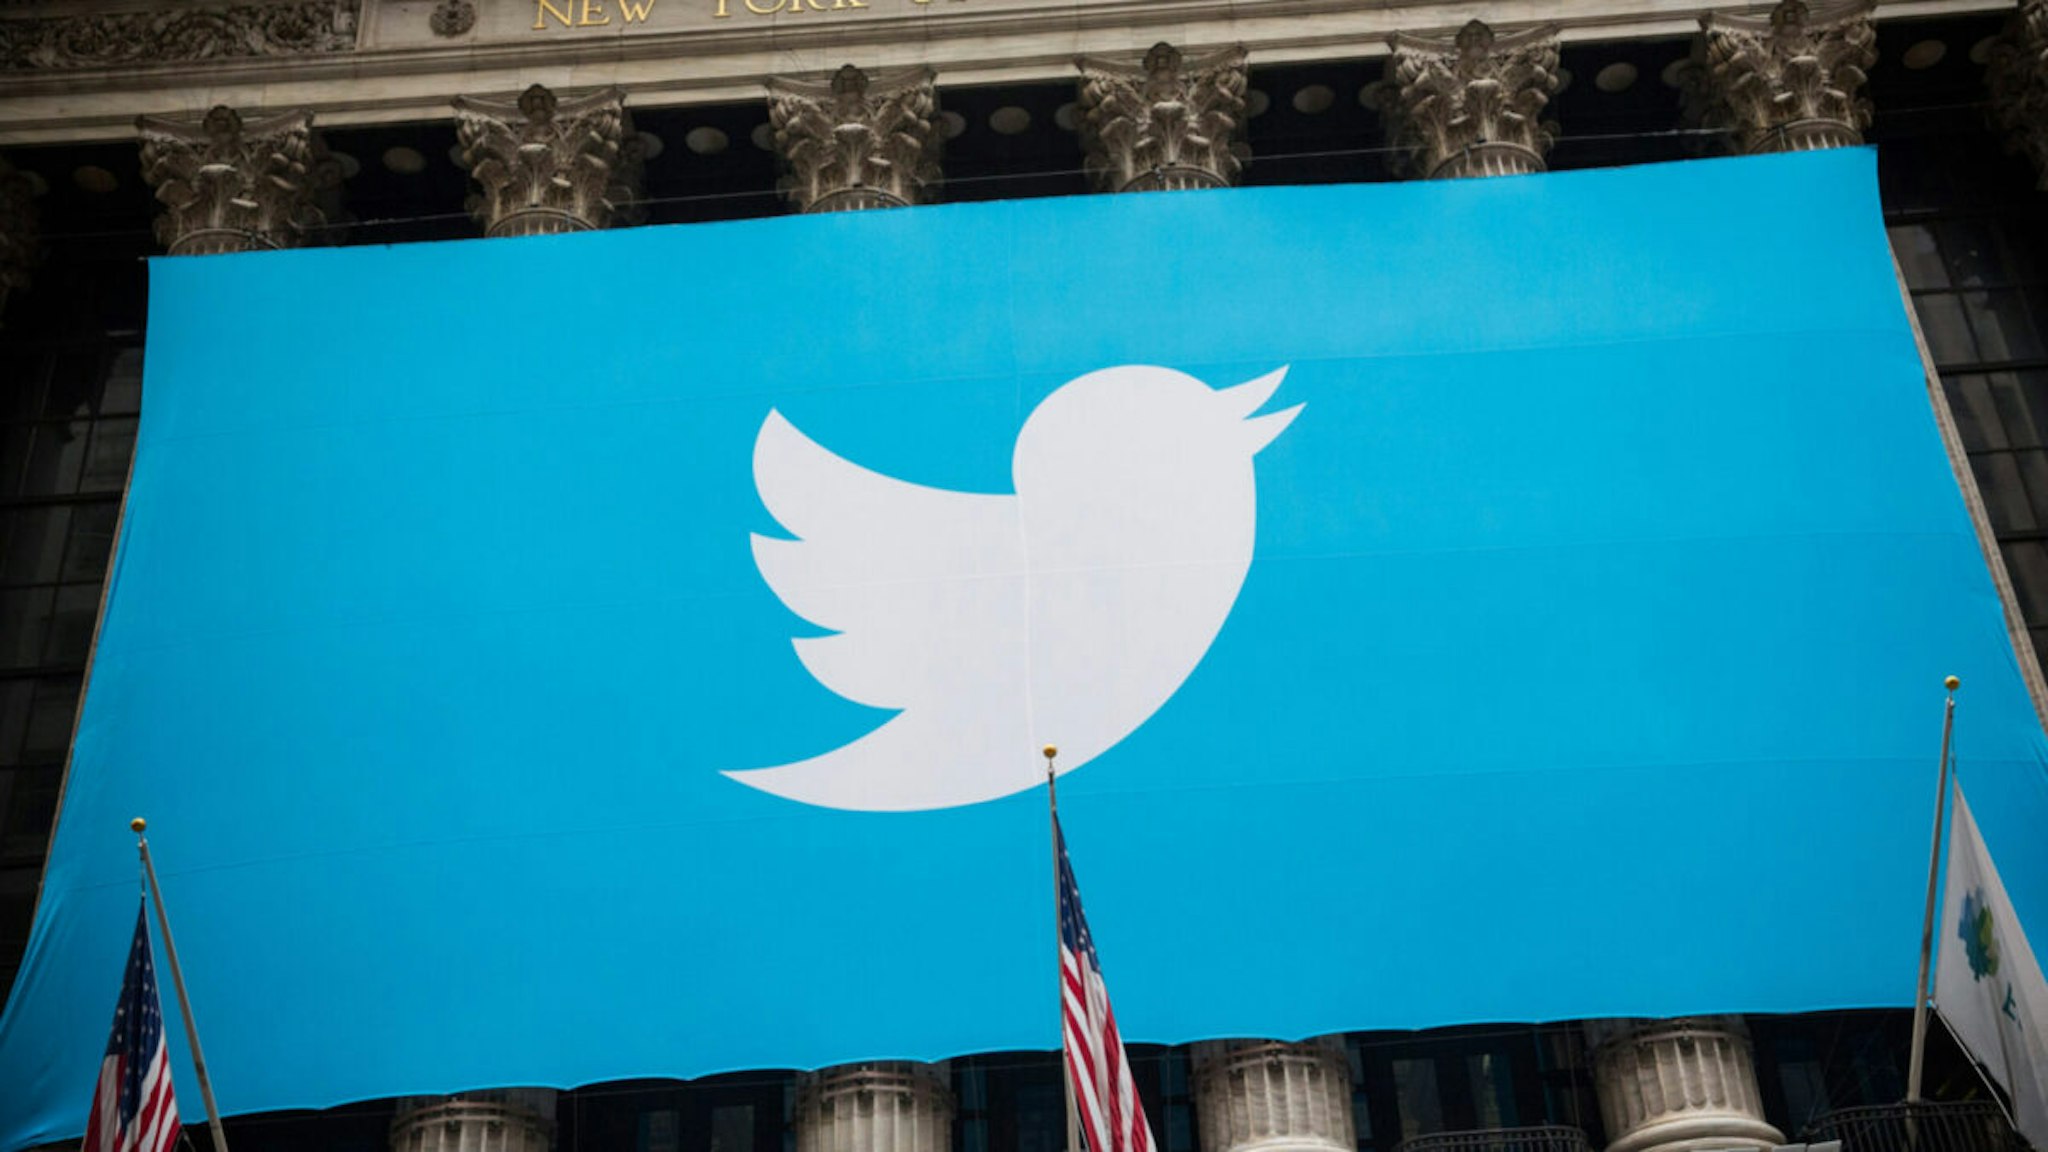 The Twitter logo is displayed on a banner outside the New York Stock Exchange (NYSE) on November 7, 2013 in New York City.